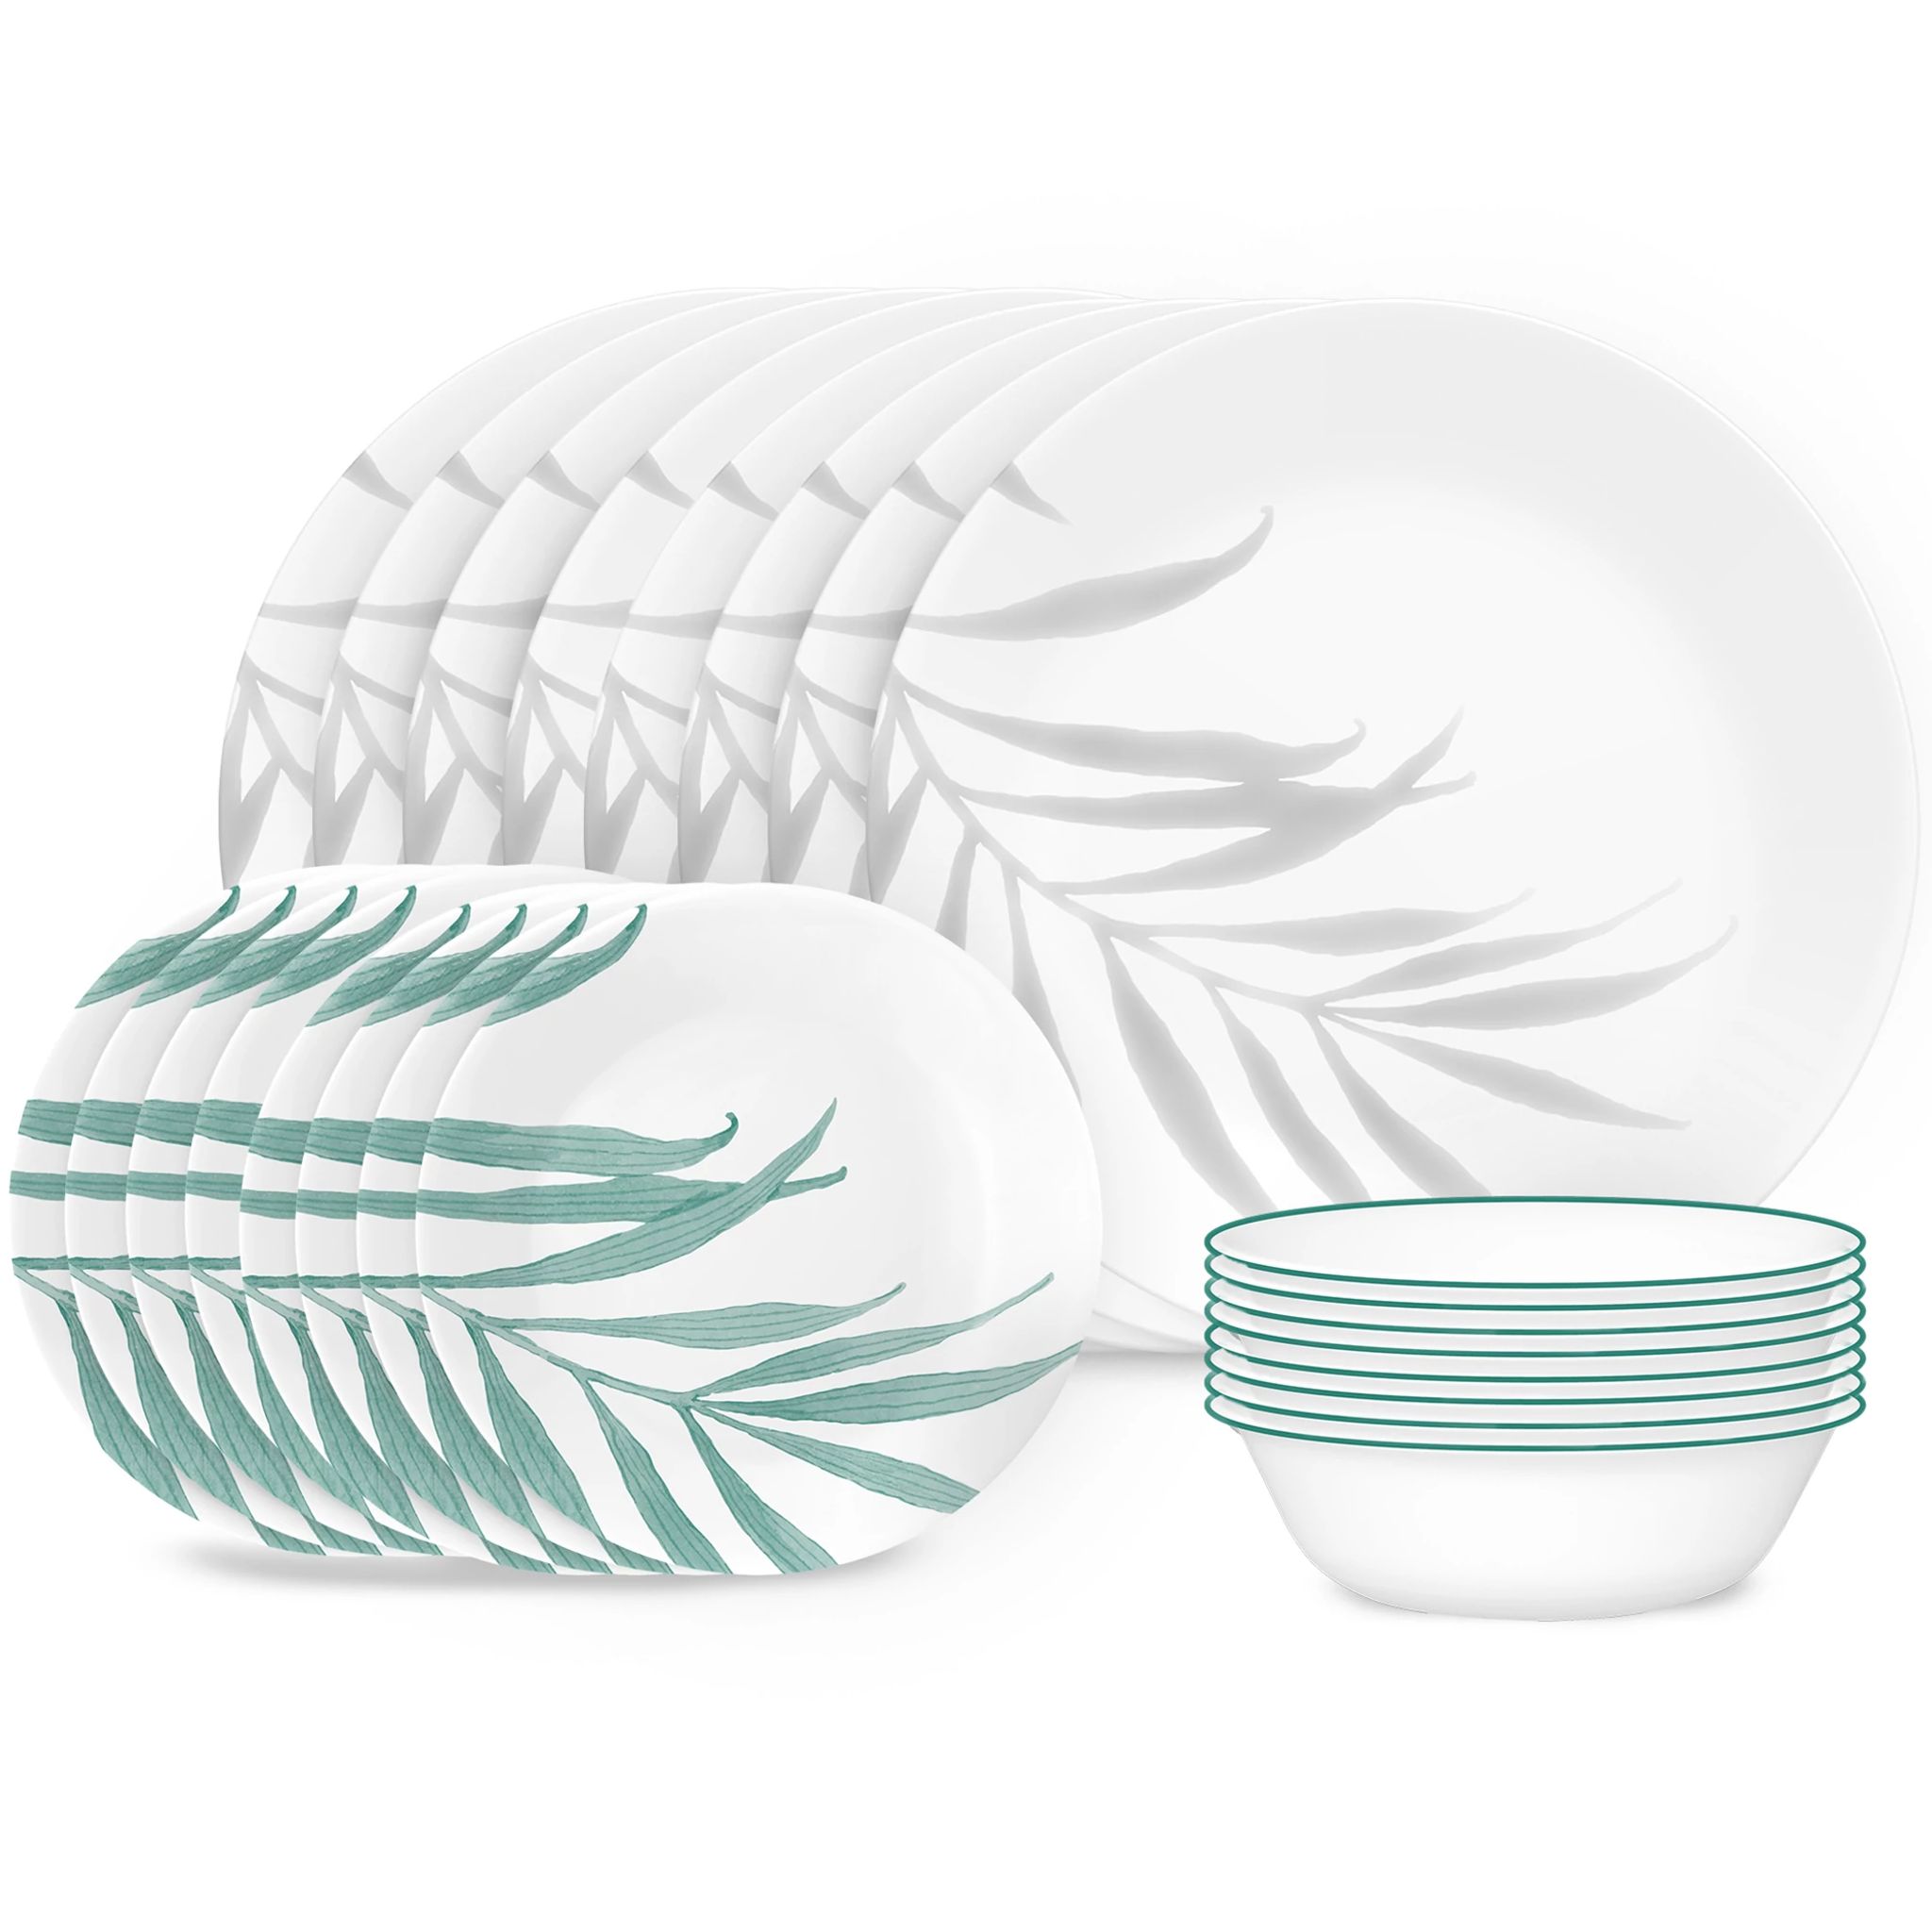 solar-print-18-piece-dinnerware-set-service-for-6-exclusive-zoid-tools